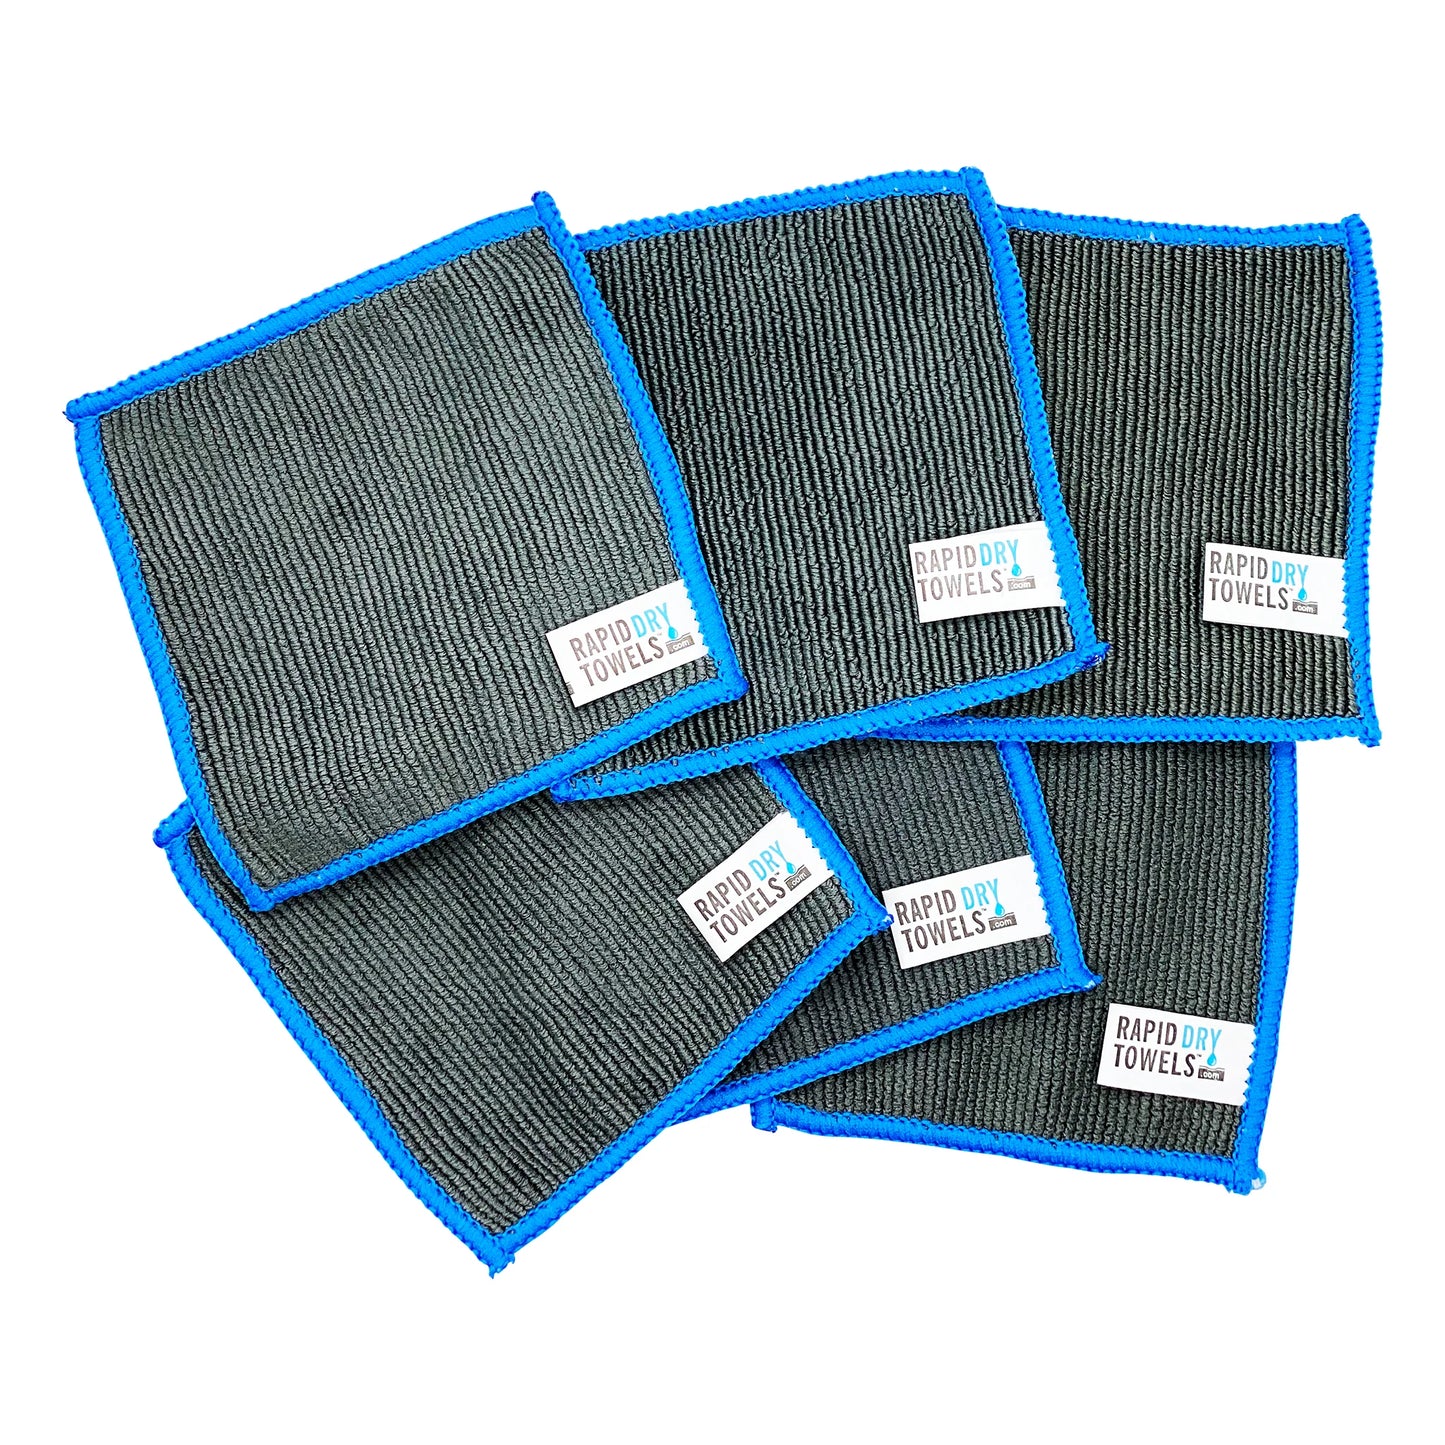 Rapid Dry Towels The Micro Rapid Dry Towel Six Pack - (4x4in / 10x10cm) - Sierra Madre Collection